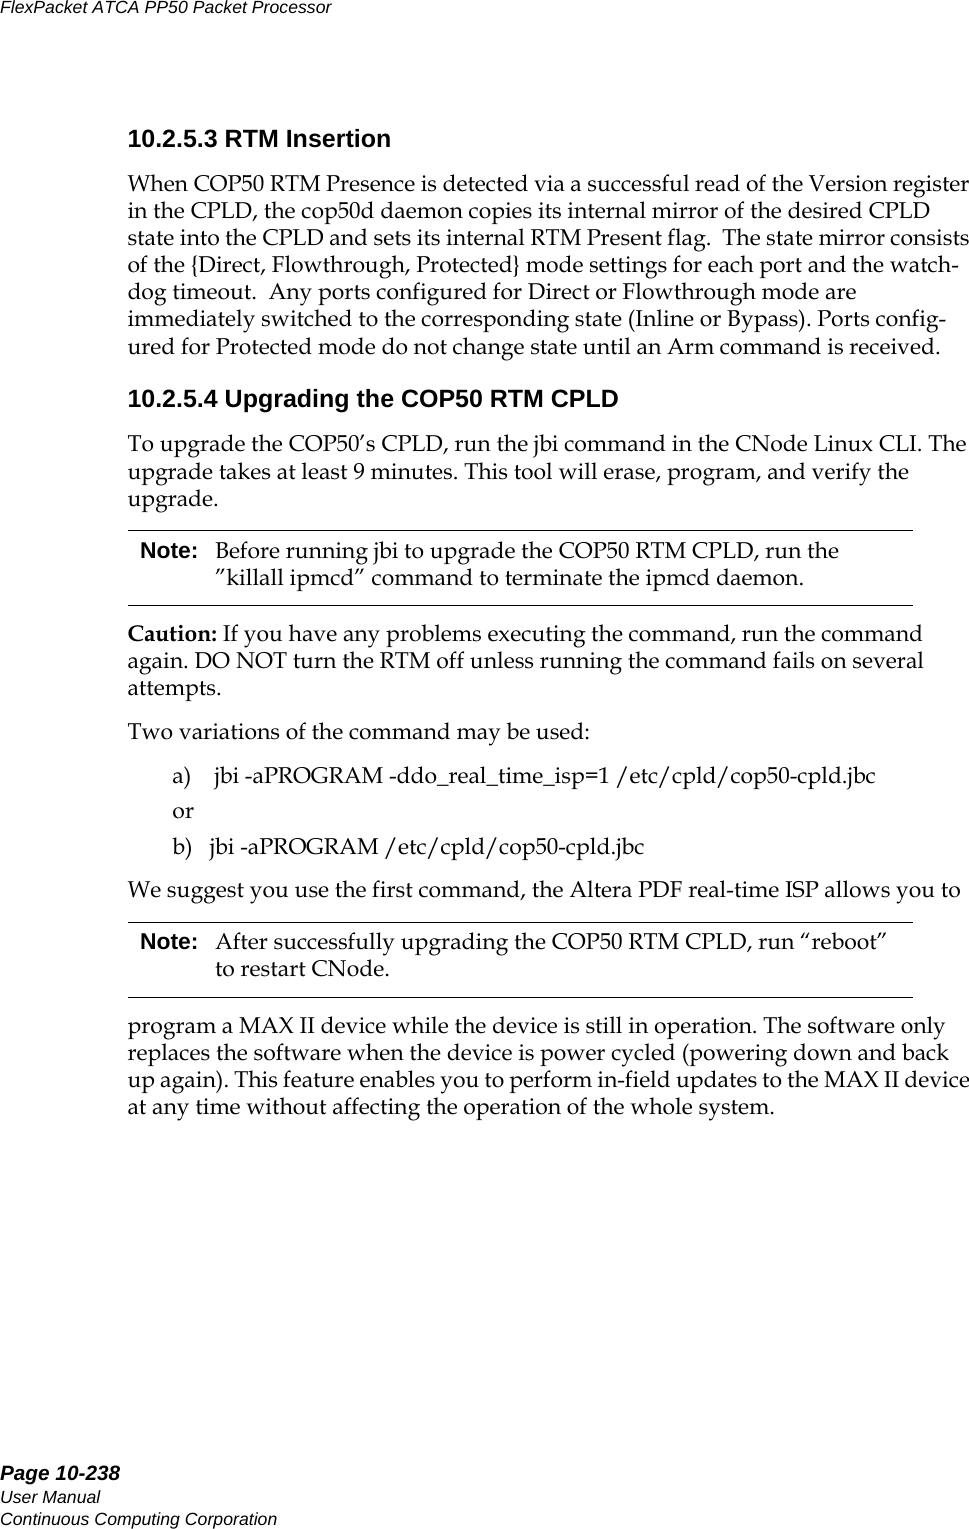 Page 10-238User ManualContinuous Computing CorporationFlexPacket ATCA PP50 Packet Processor     Preliminary10.2.5.3 RTM InsertionWhen COP50 RTM Presence is detected via a successful read of the Version register in the CPLD, the cop50d daemon copies its internal mirror of the desired CPLD state into the CPLD and sets its internal RTM Present flag.  The state mirror consists of the {Direct, Flowthrough, Protected} mode settings for each port and the watch-dog timeout.  Any ports configured for Direct or Flowthrough mode are immediately switched to the corresponding state (Inline or Bypass). Ports config-ured for Protected mode do not change state until an Arm command is received.10.2.5.4 Upgrading the COP50 RTM CPLDTo upgrade the COP50’s CPLD, run the jbi command in the CNode Linux CLI. The upgrade takes at least 9 minutes. This tool will erase, program, and verify the upgrade. Caution: If you have any problems executing the command, run the command again. DO NOT turn the RTM off unless running the command fails on several attempts.Two variations of the command may be used:a)    jbi -aPROGRAM -ddo_real_time_isp=1 /etc/cpld/cop50-cpld.jbcorb)   jbi -aPROGRAM /etc/cpld/cop50-cpld.jbcWe suggest you use the first command, the Altera PDF real-time ISP allows you to program a MAX II device while the device is still in operation. The software only replaces the software when the device is power cycled (powering down and back up again). This feature enables you to perform in-field updates to the MAX II device at any time without affecting the operation of the whole system.Note: Before running jbi to upgrade the COP50 RTM CPLD, run the ”killall ipmcd” command to terminate the ipmcd daemon.Note: After successfully upgrading the COP50 RTM CPLD, run “reboot” to restart CNode.